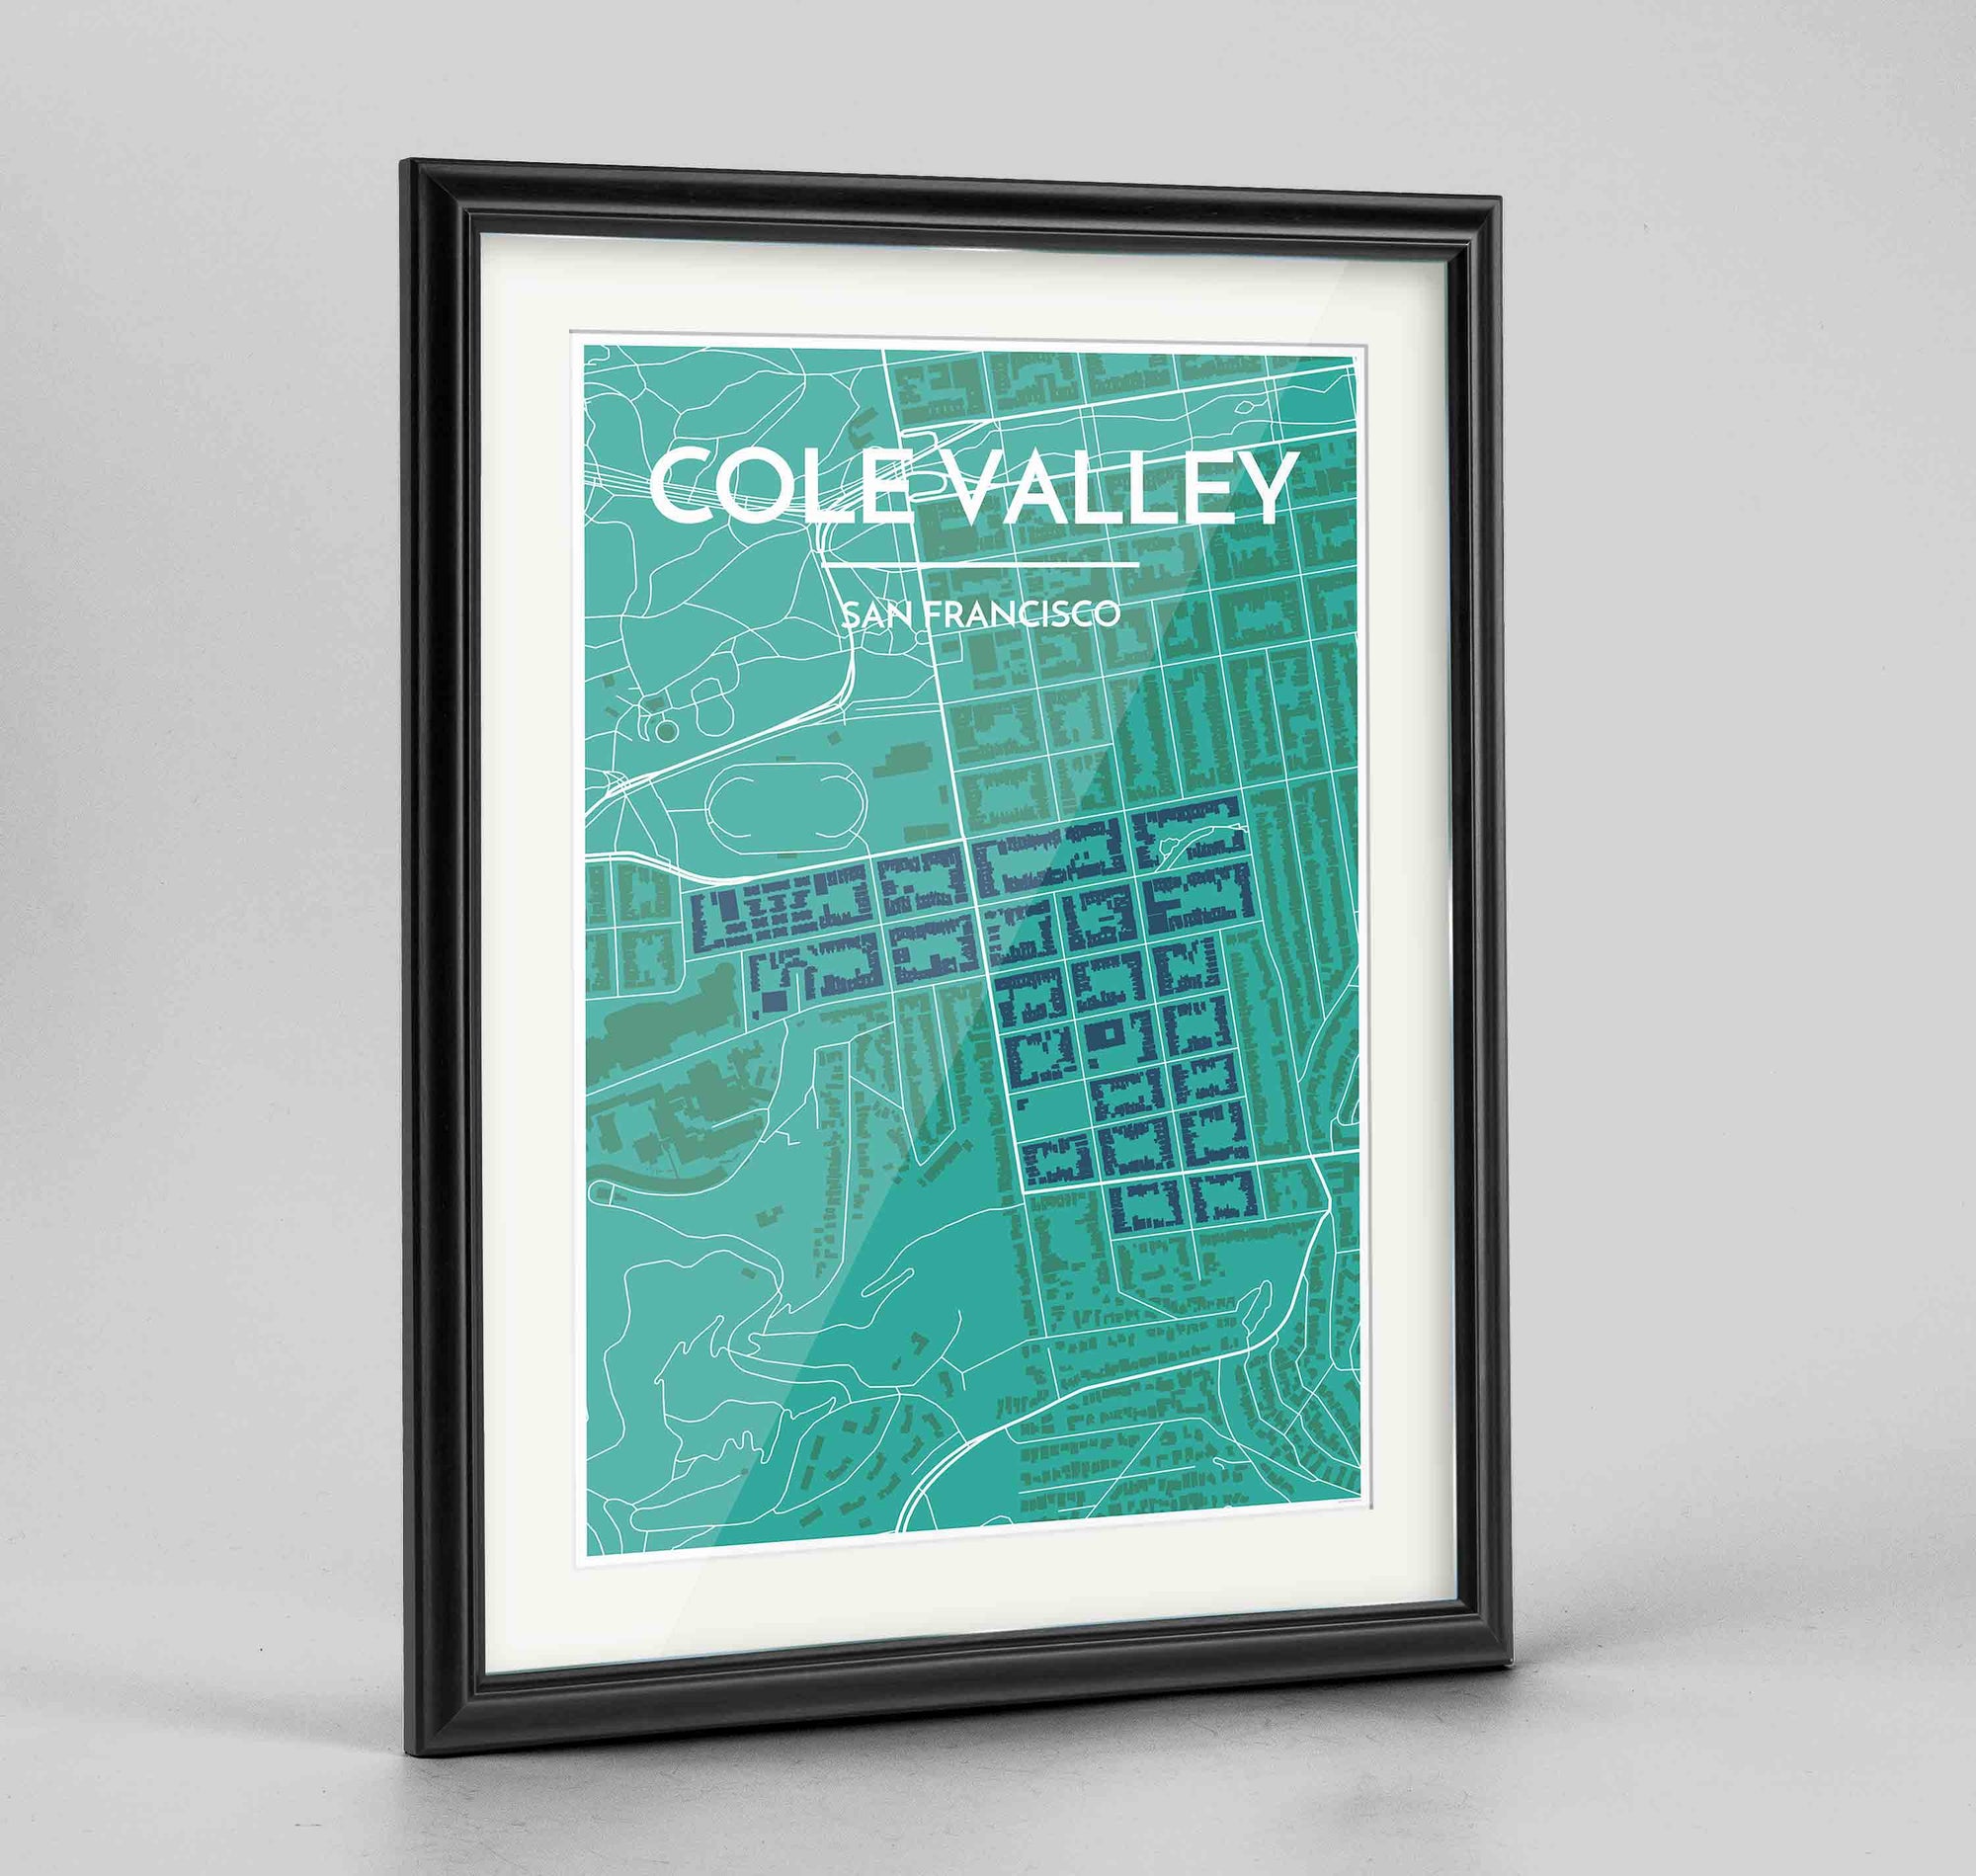 Framed Cole Valley San Francisco Map Art Print 24x36" Traditional Black frame Point Two Design Group